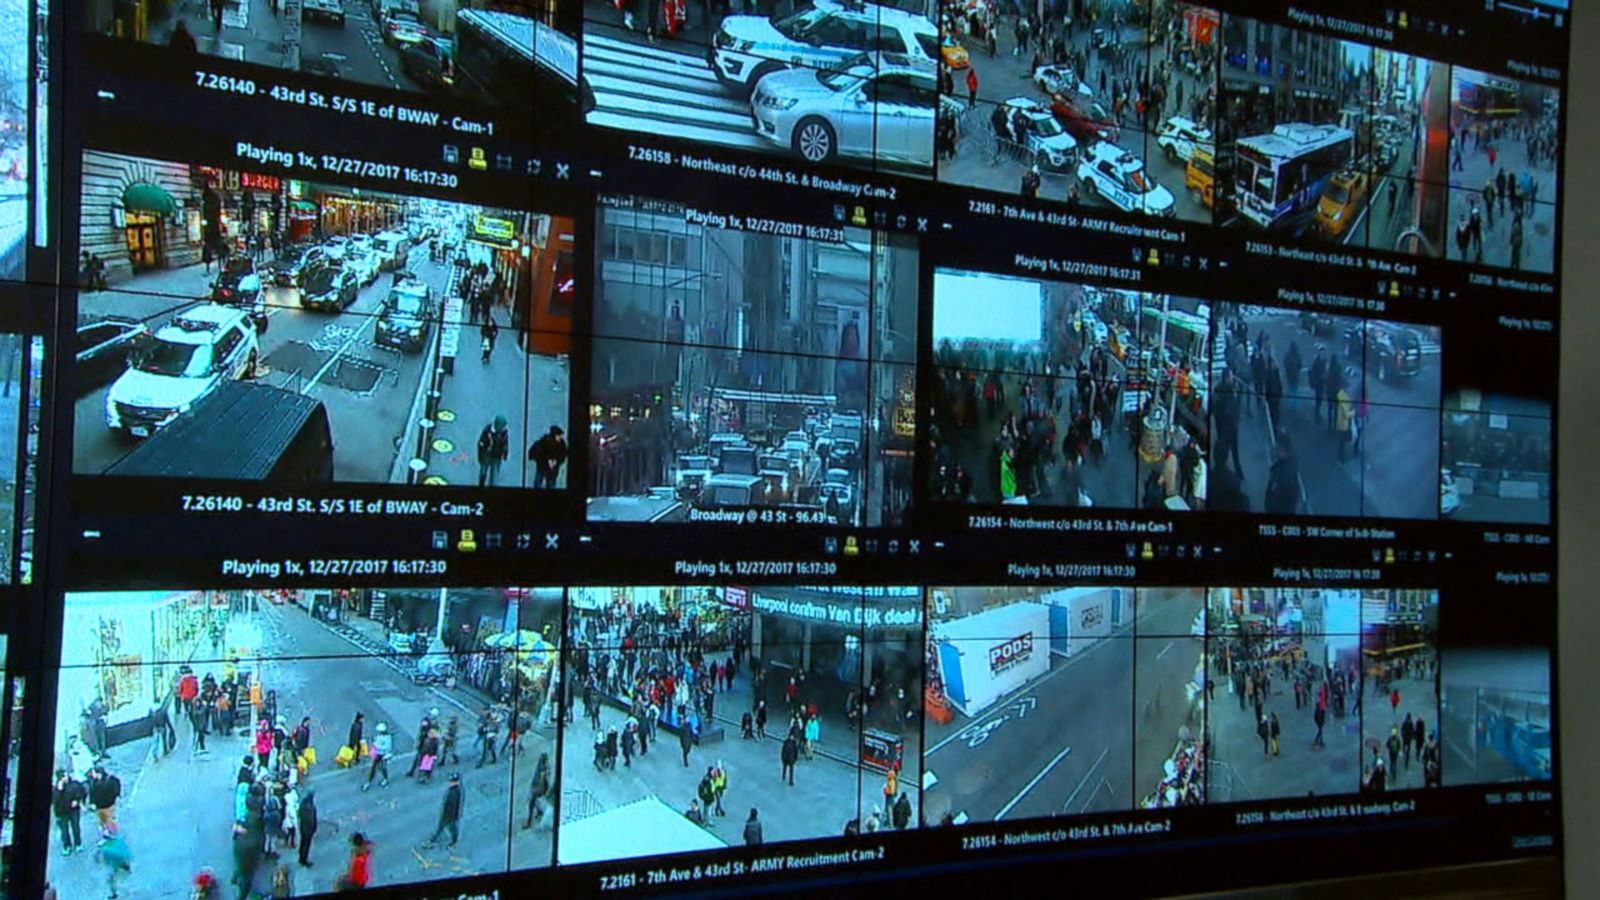 VIDEO: New technology, unprecedented security in place for for New Year's Eve